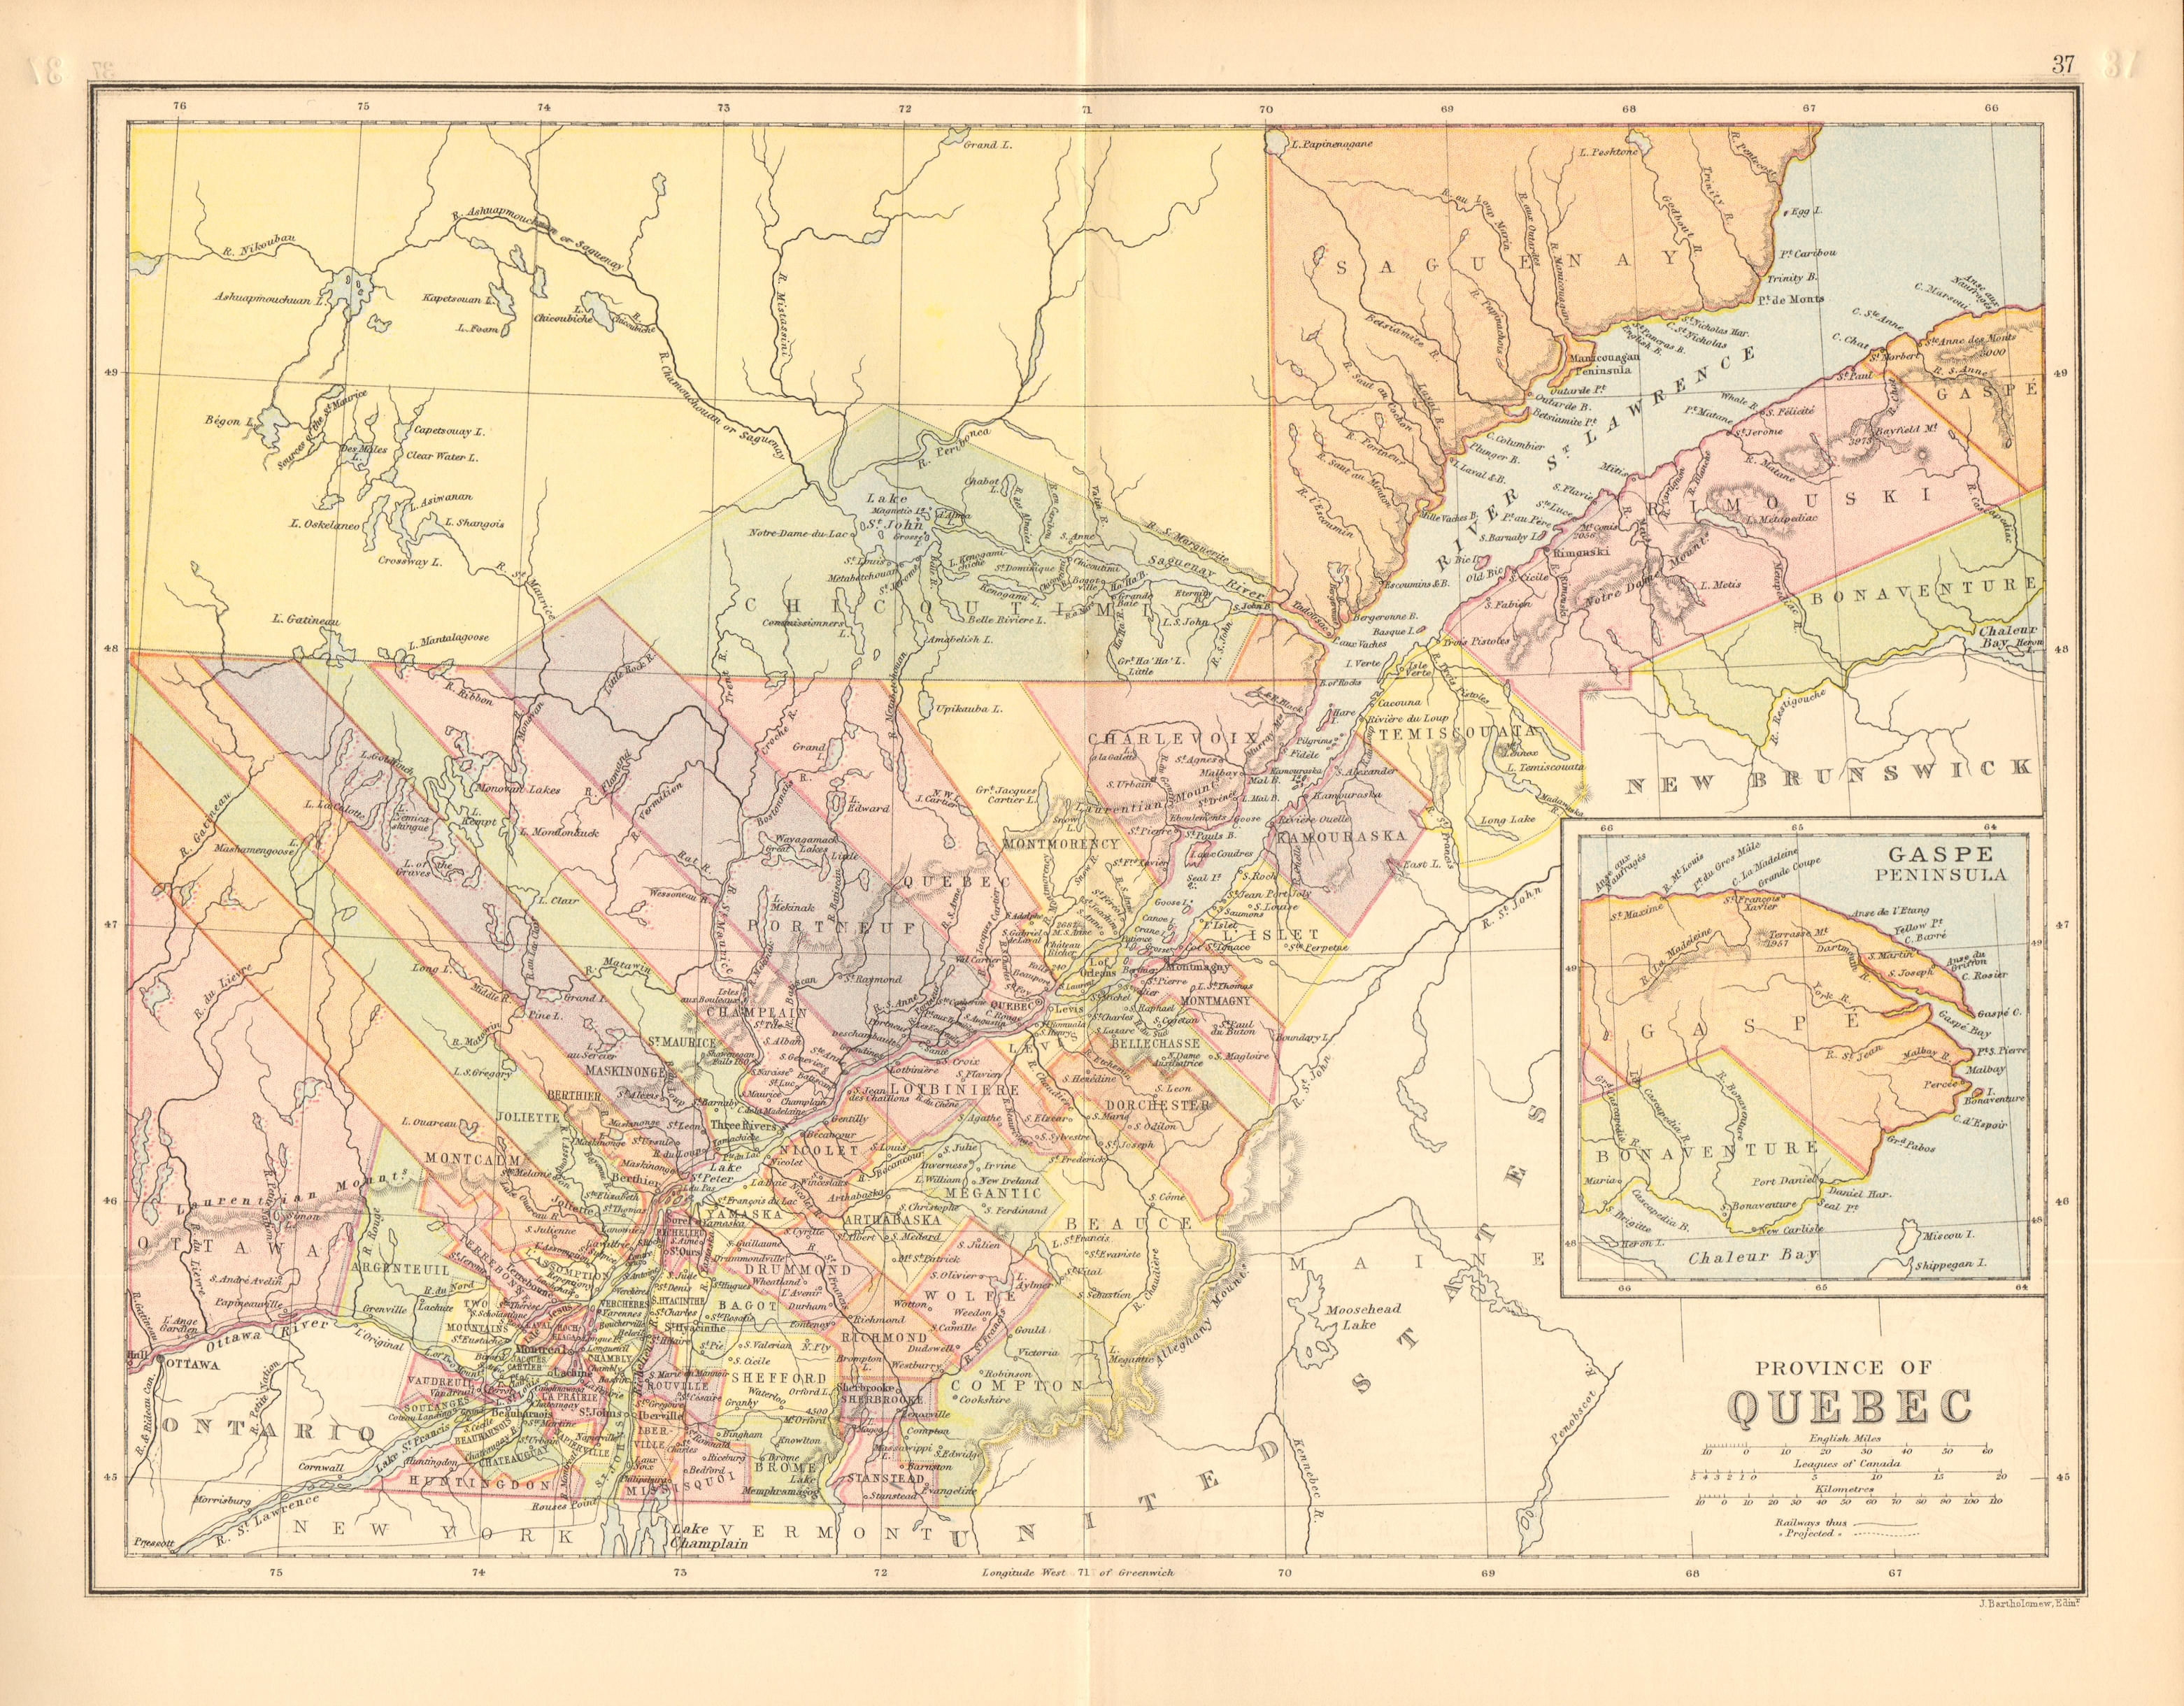 Associate Product QUEBEC. St Lawrence. Counties. Railways. Canada. BARTHOLOMEW 1876 old map